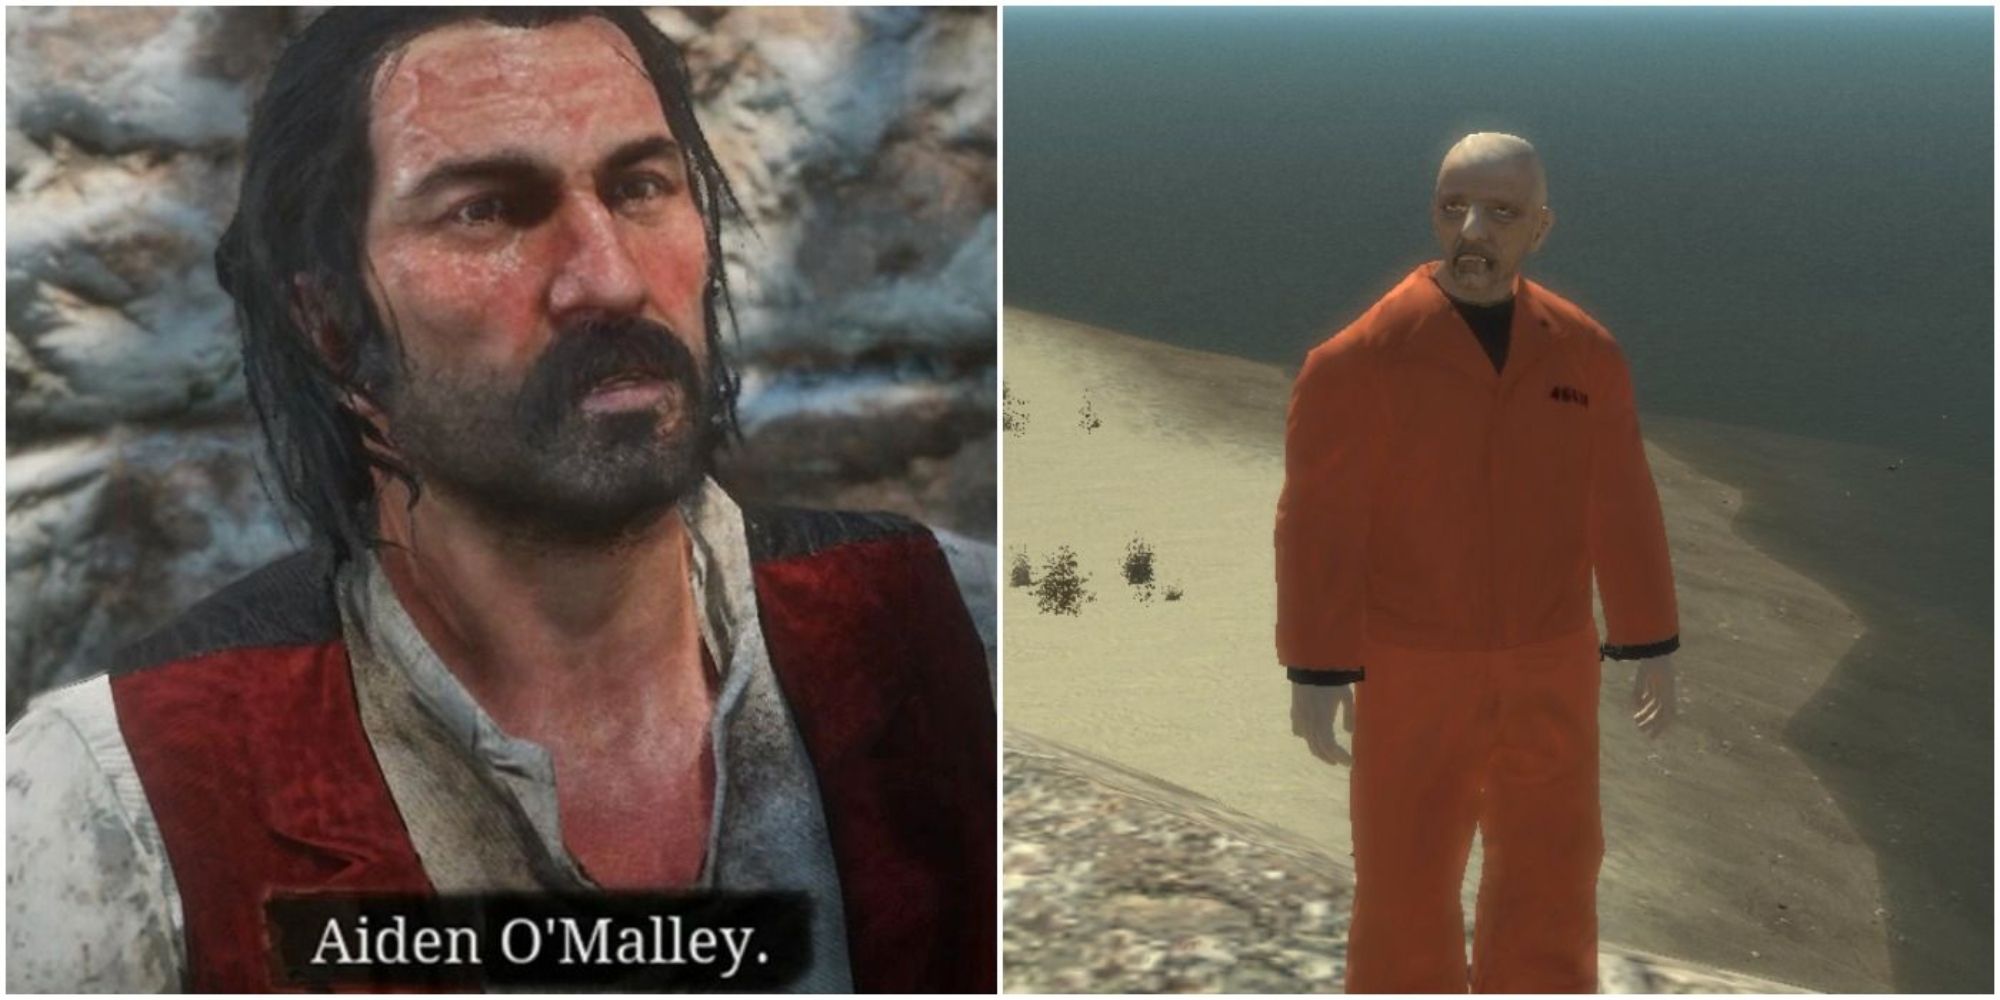 RDR2 and GTAIV Split Image Of Dutch and Aiden OMalley